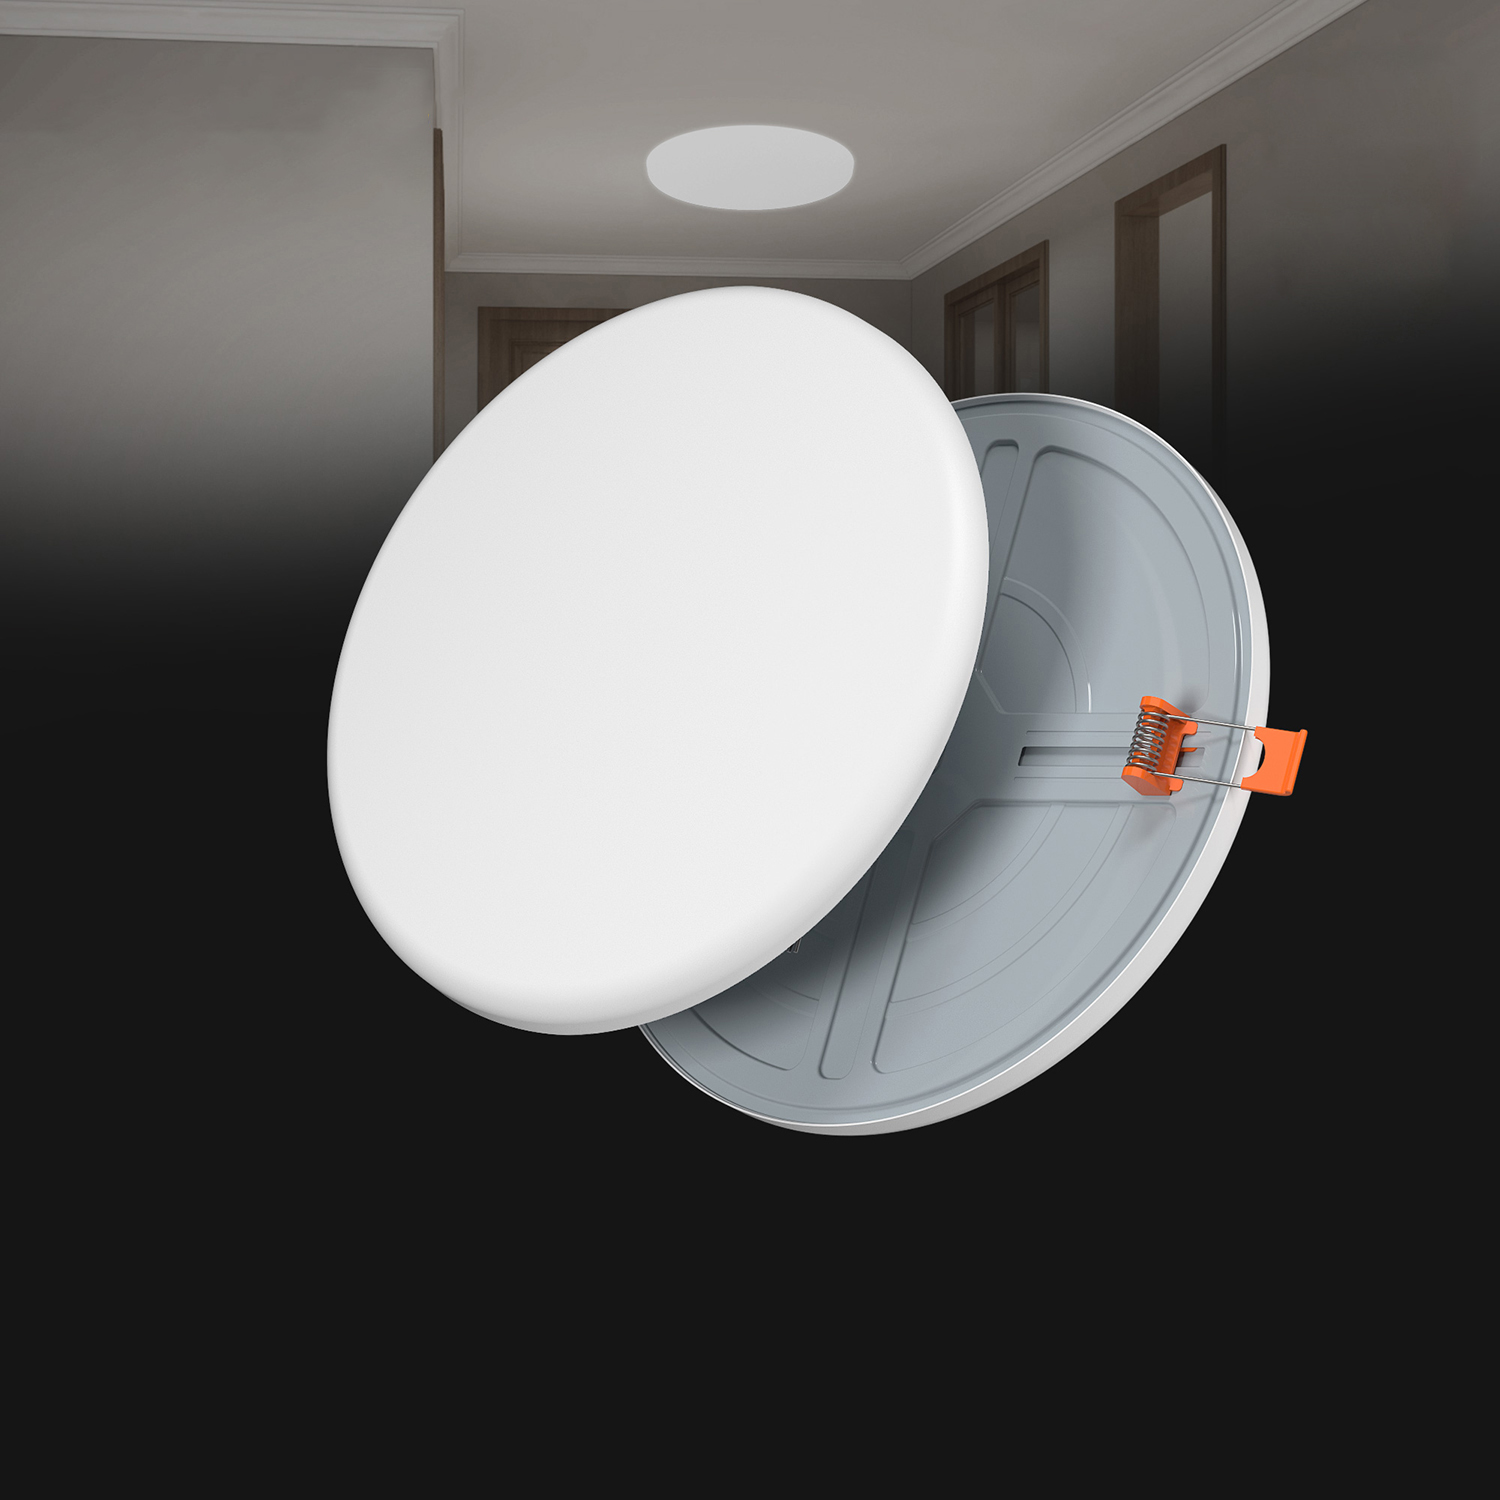 New Recessed Adjustable Downlight Featured Image